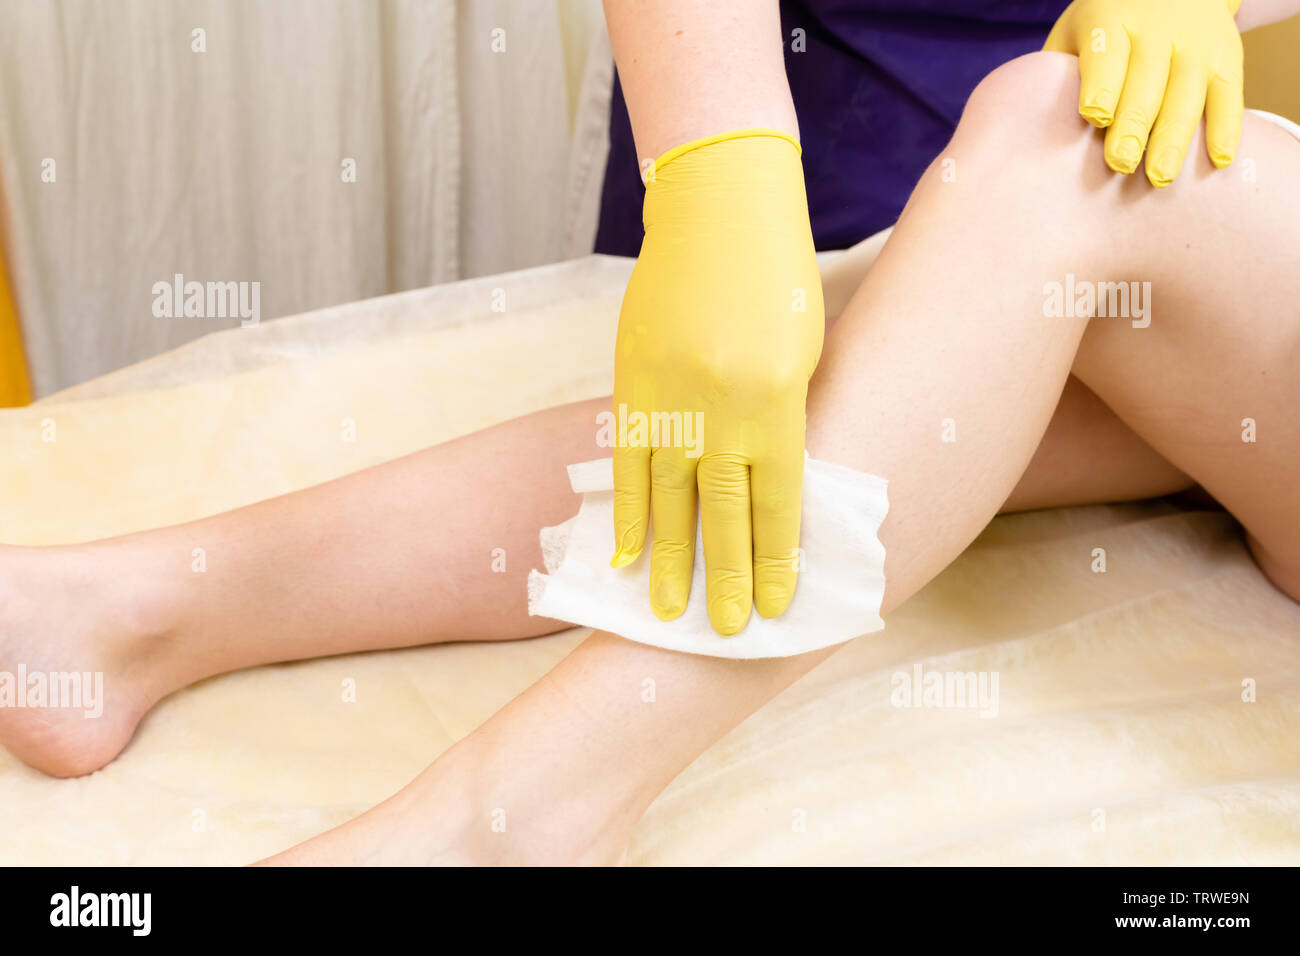 Method of hair removal sugar paste for sweetening c female body. The work and methods of the master are shown. Stock Photo